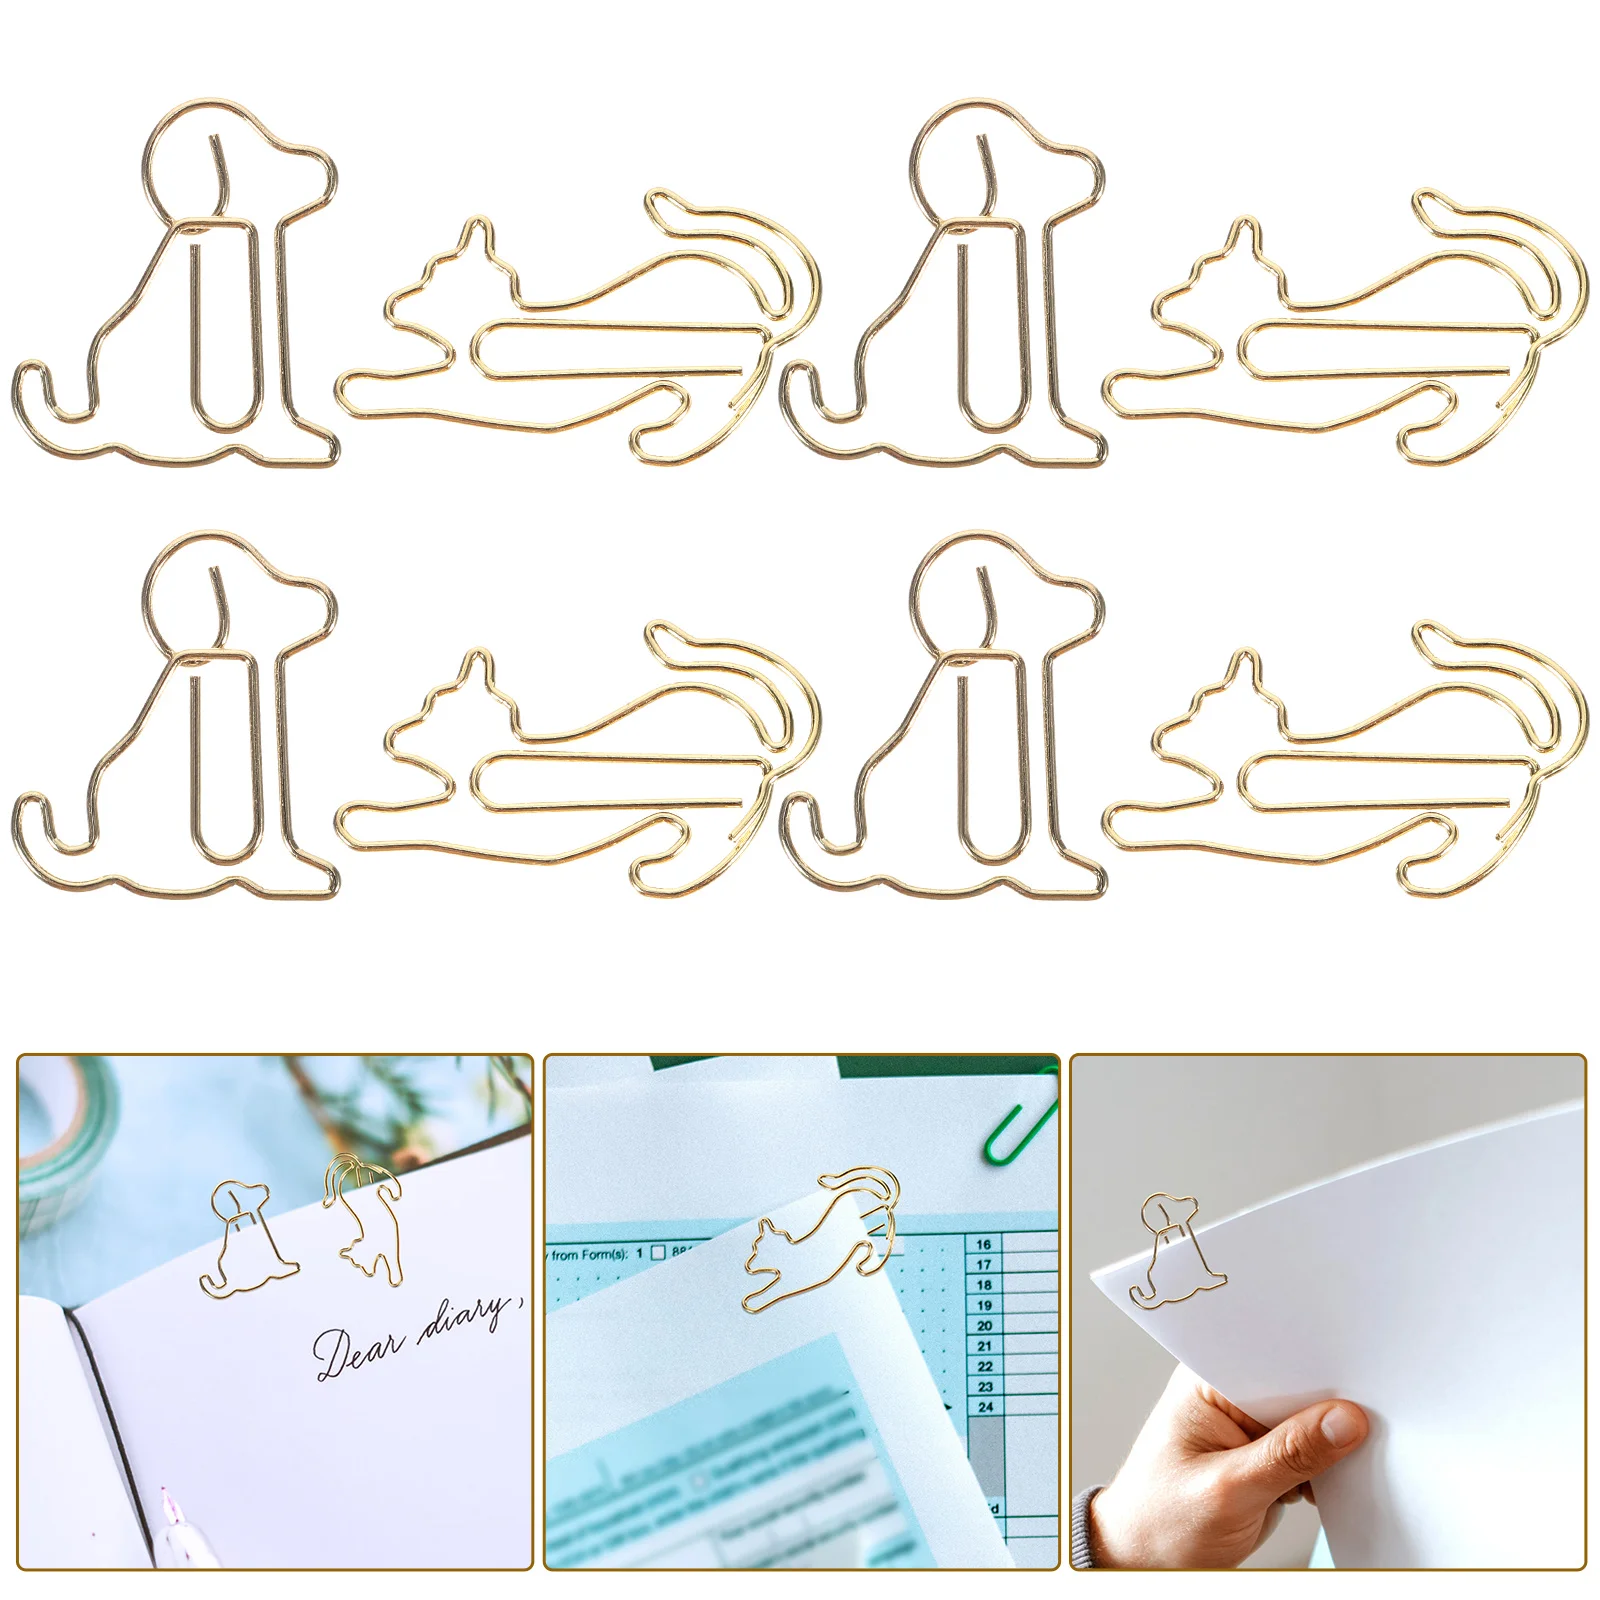 

Animal Paper Clip Puppy Animals Paperclips Cat Shaped Delicate Portable Adorable Metal Clamp Clamps